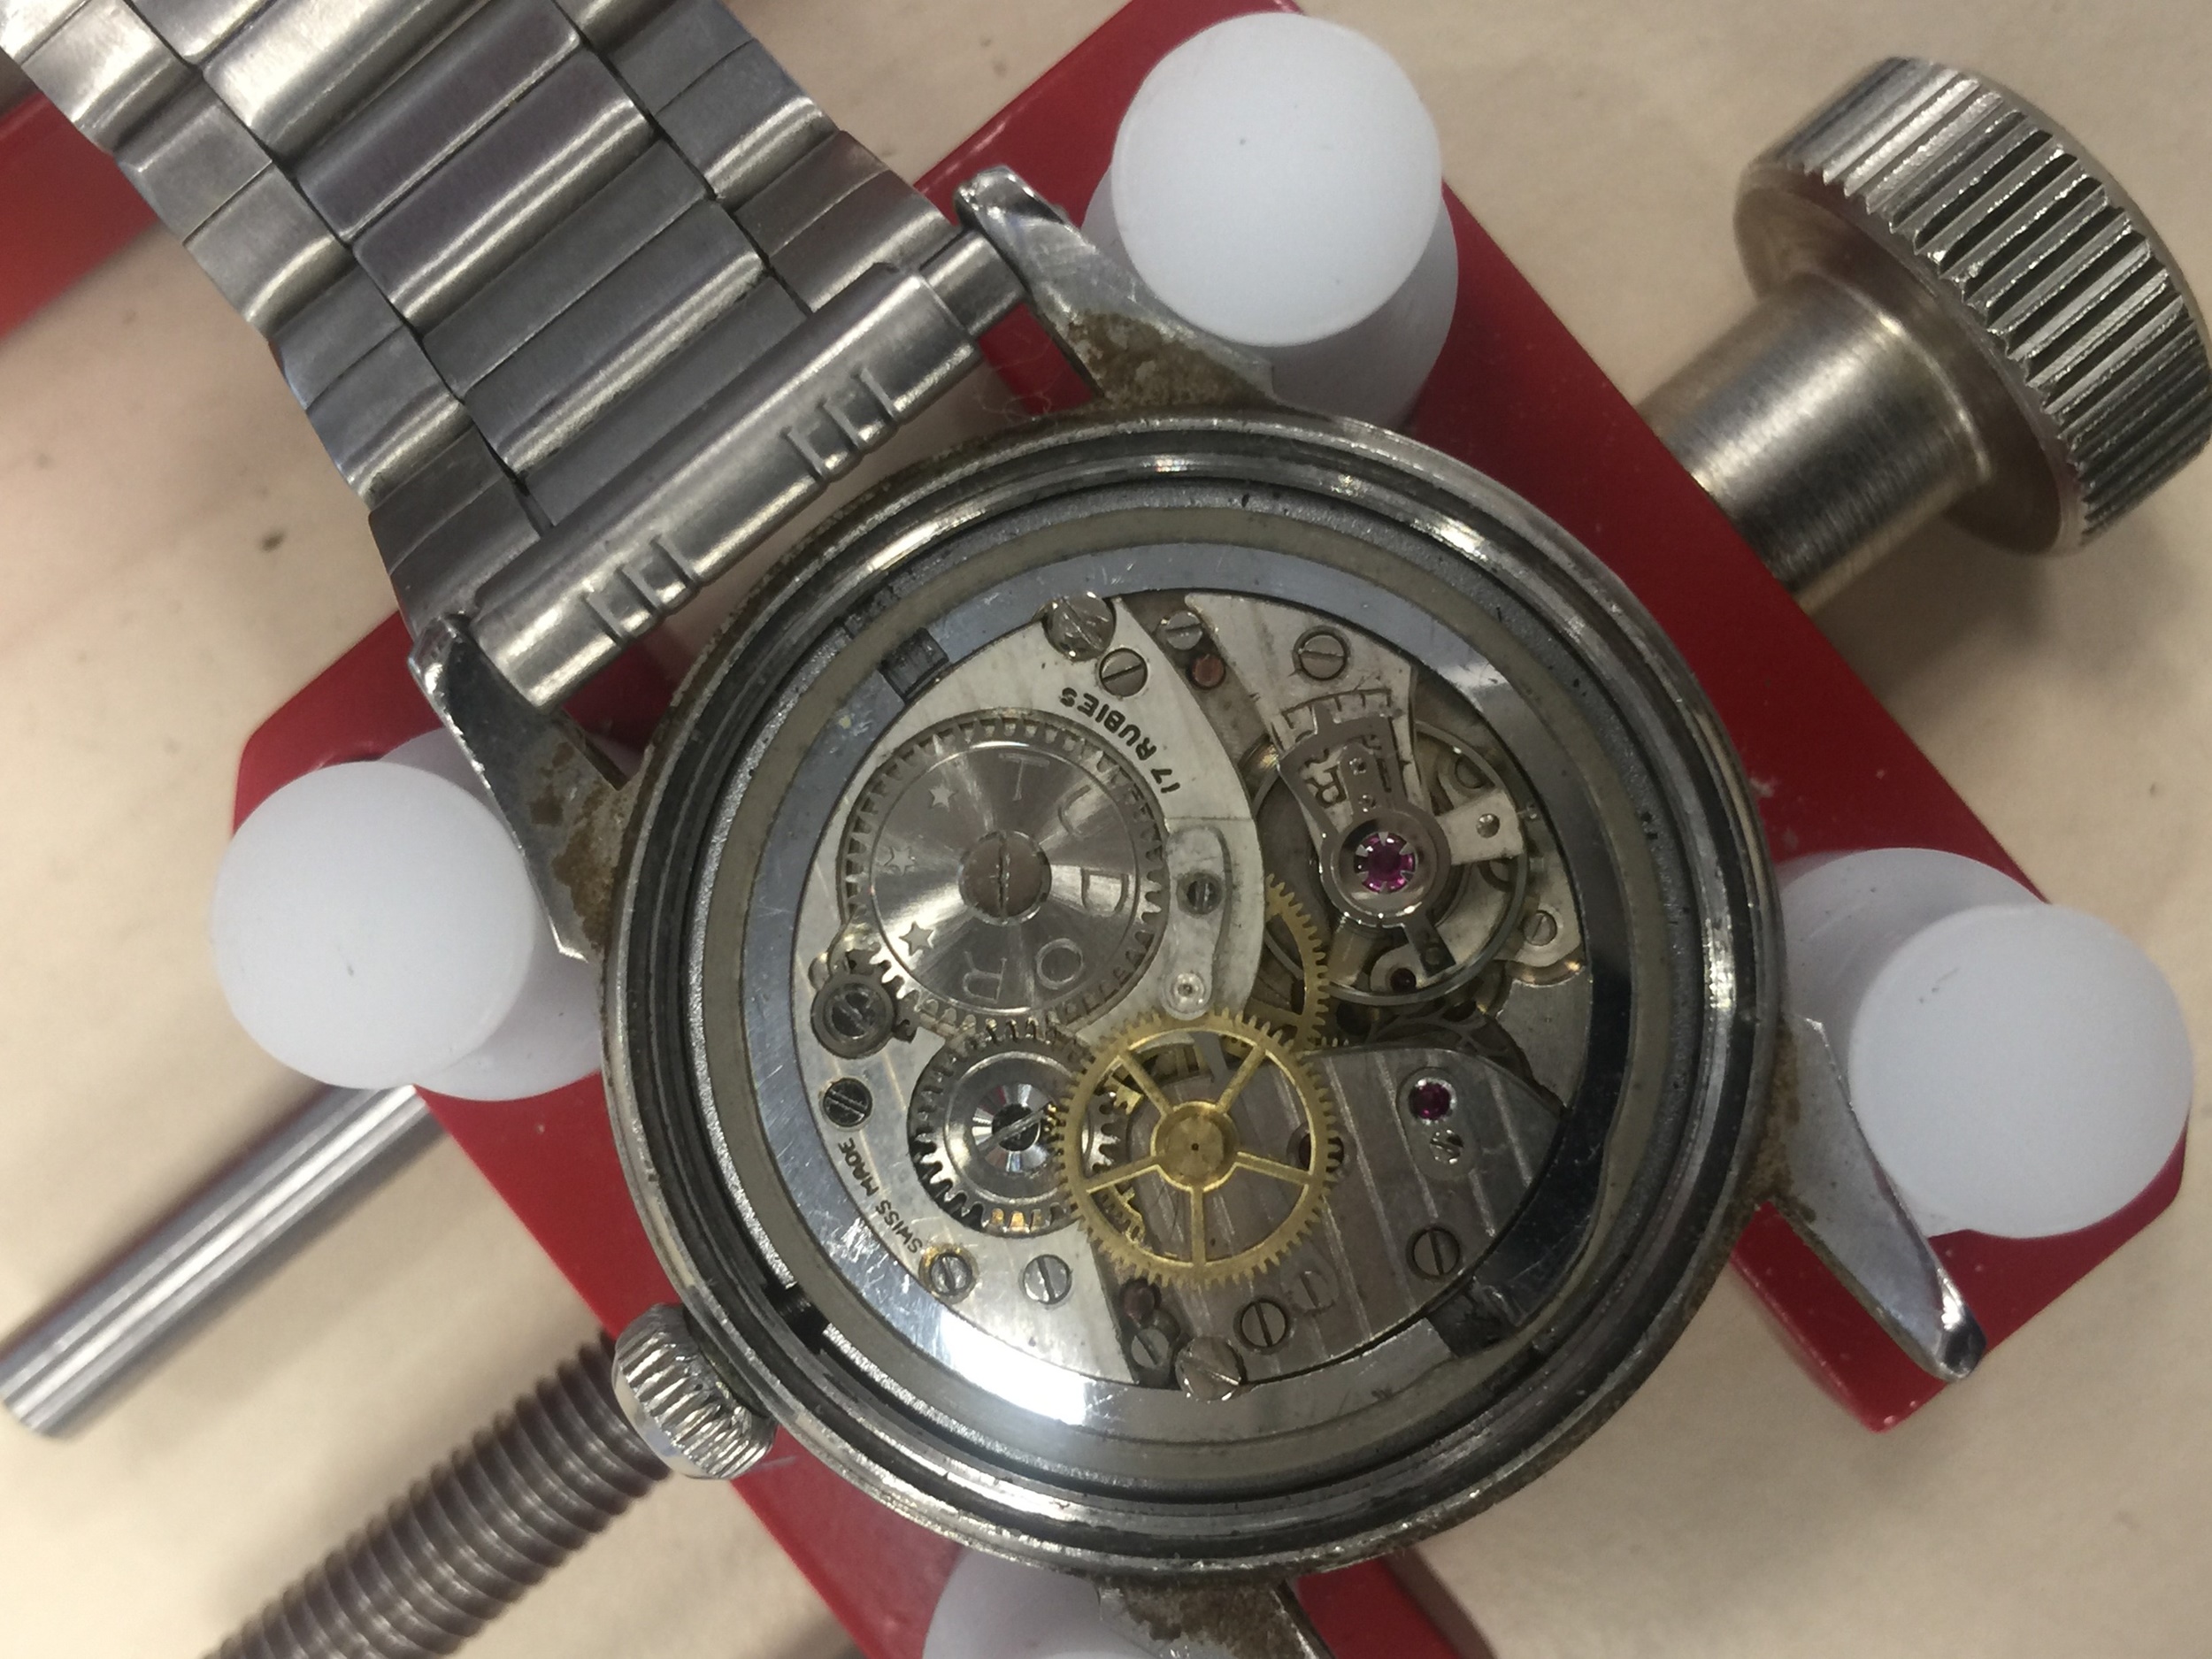 A GENTLEMAN'S TUDOR OYSTER STAINLESS STEEL AUTOMATIC WRIST WATCH - Image 2 of 4